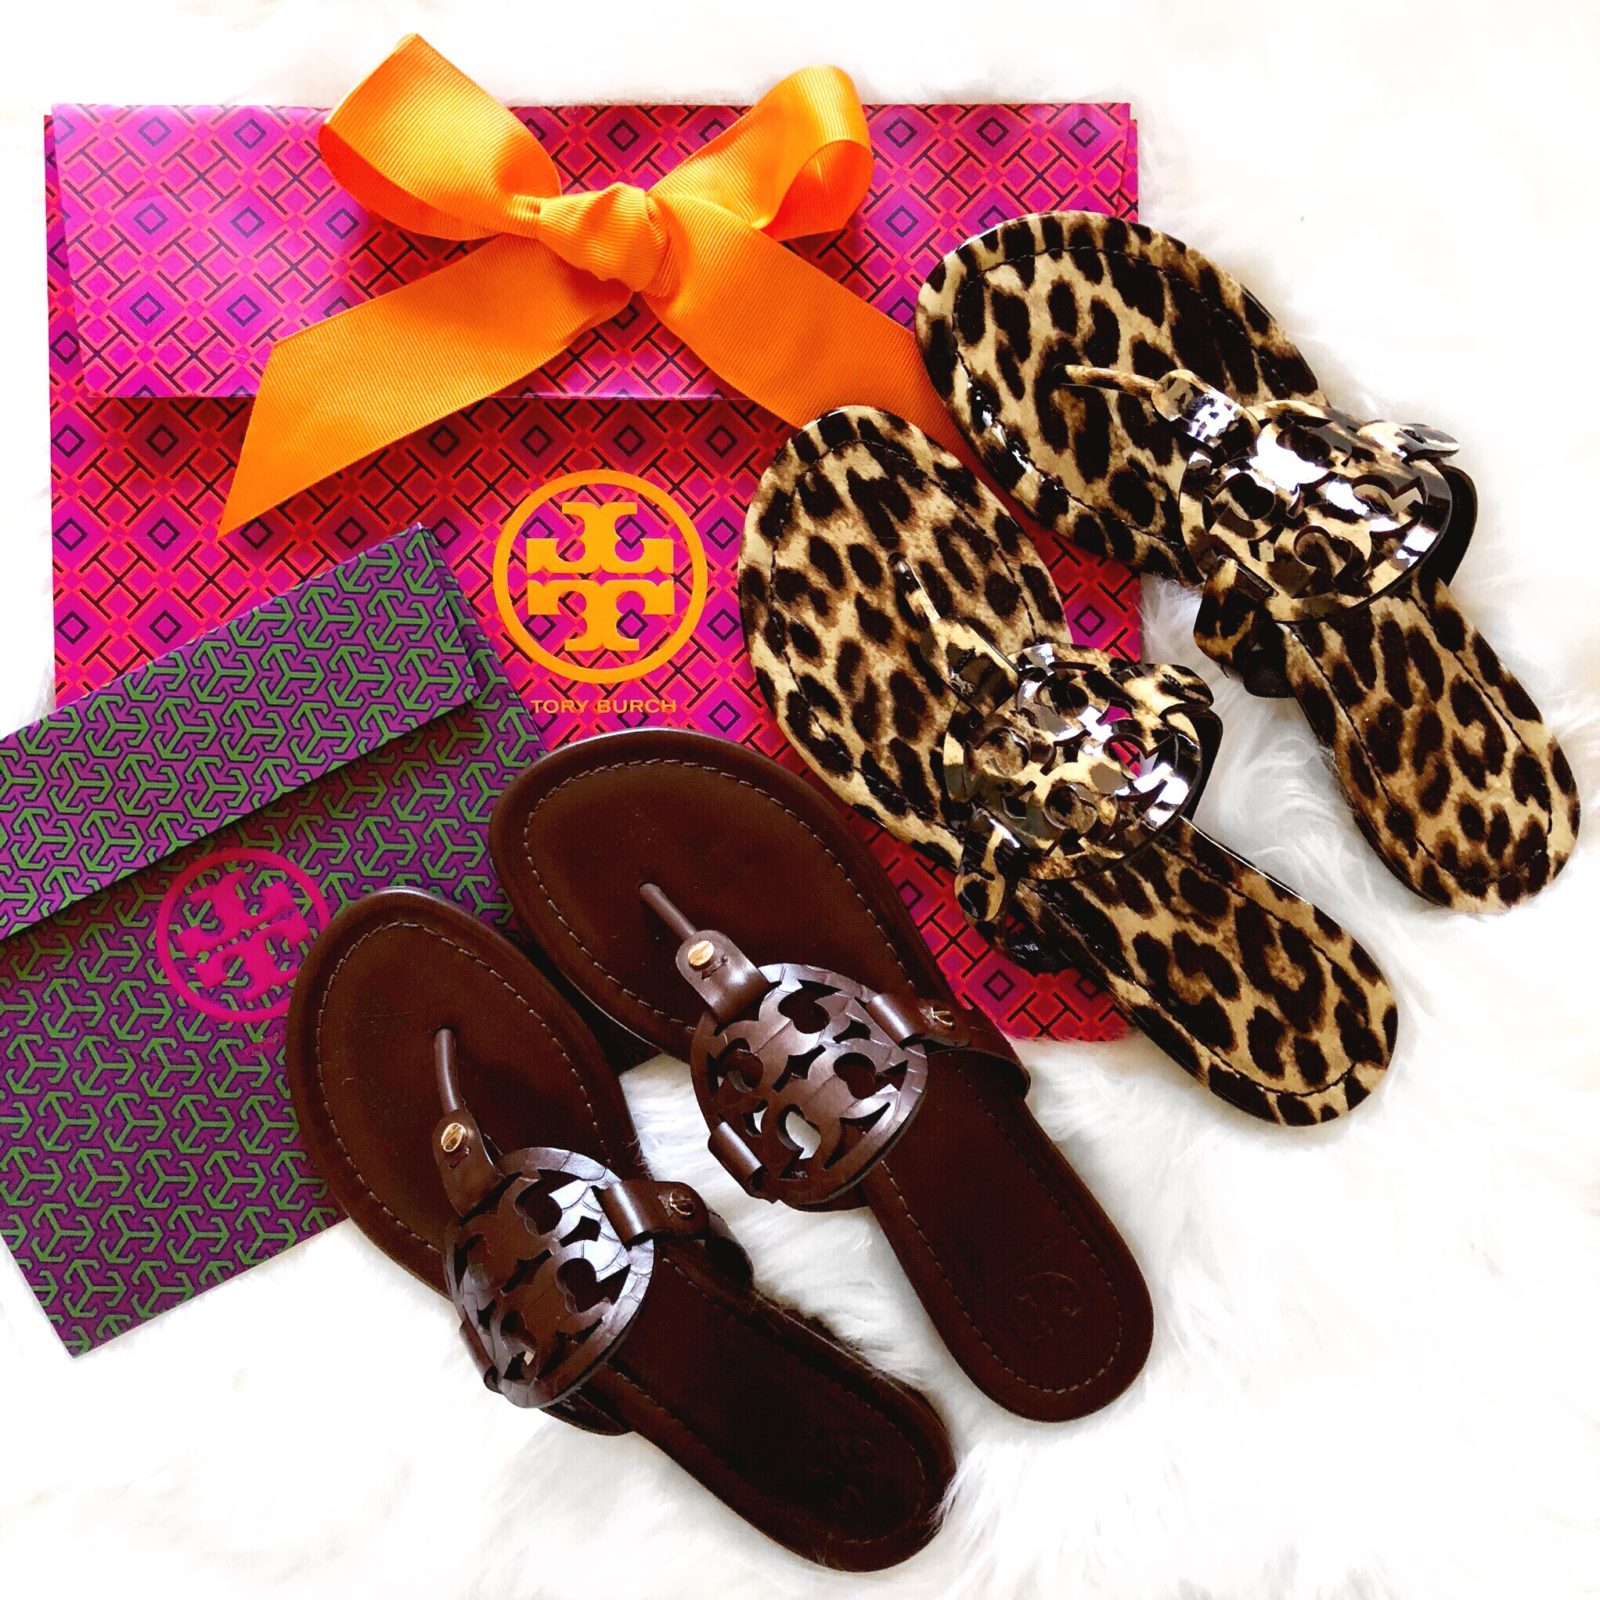 Tory Burch Outlet, Spring 2021